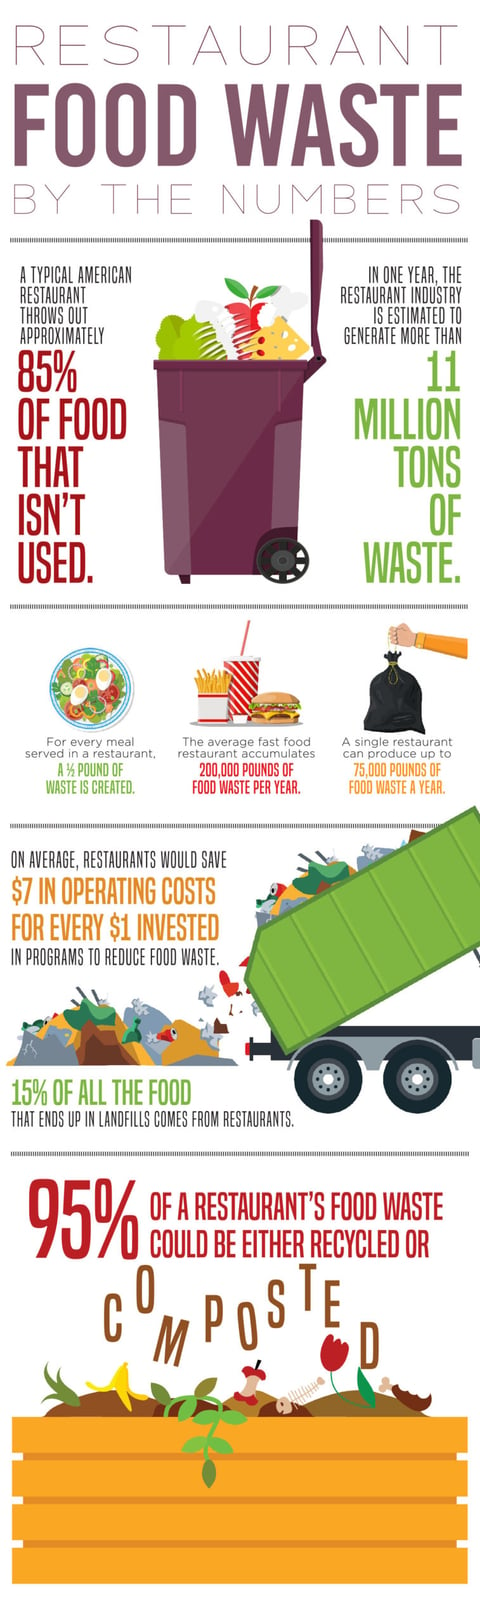 Restaurant Food Waste by the Numbers infographic by The Digest of Hoboken, NJ